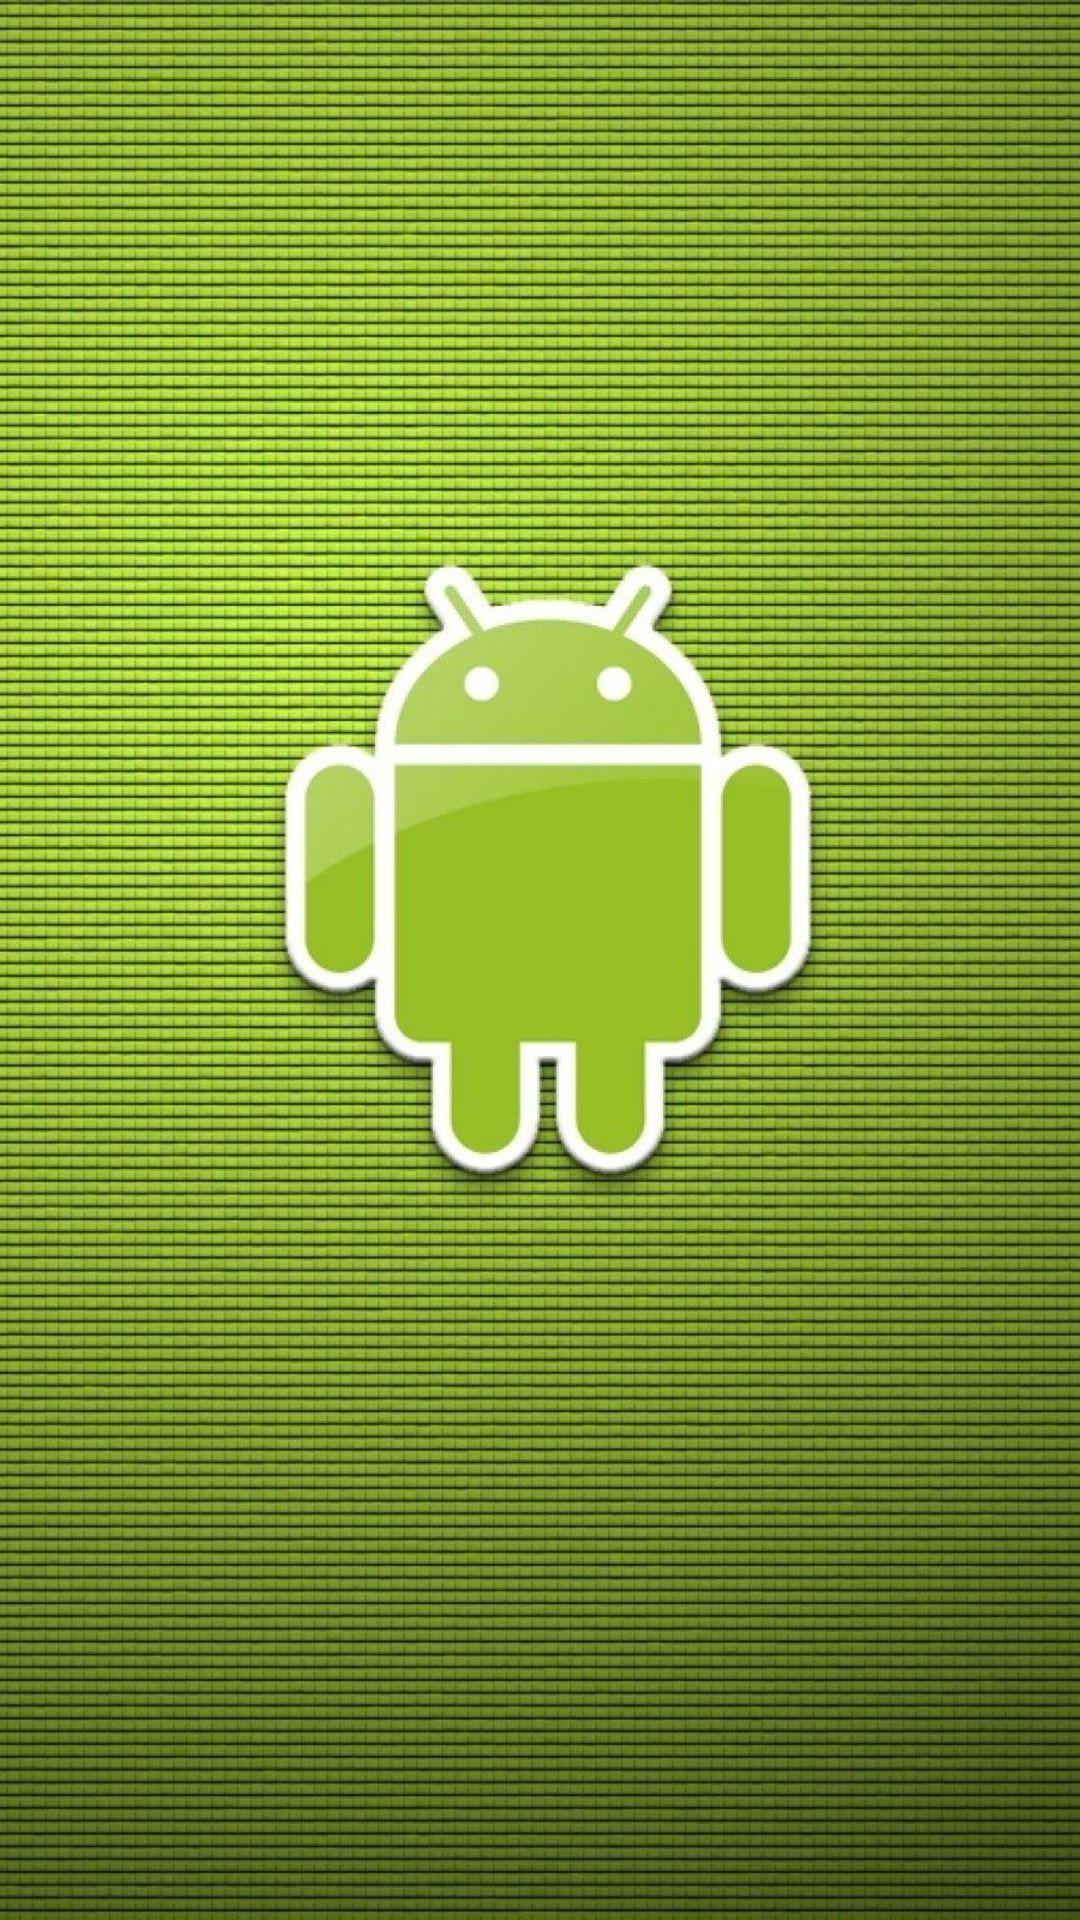 Green Android Galaxy S4 Wallpaper (1080x1920). Smartphone wallpaper, Android wallpaper, Android theme